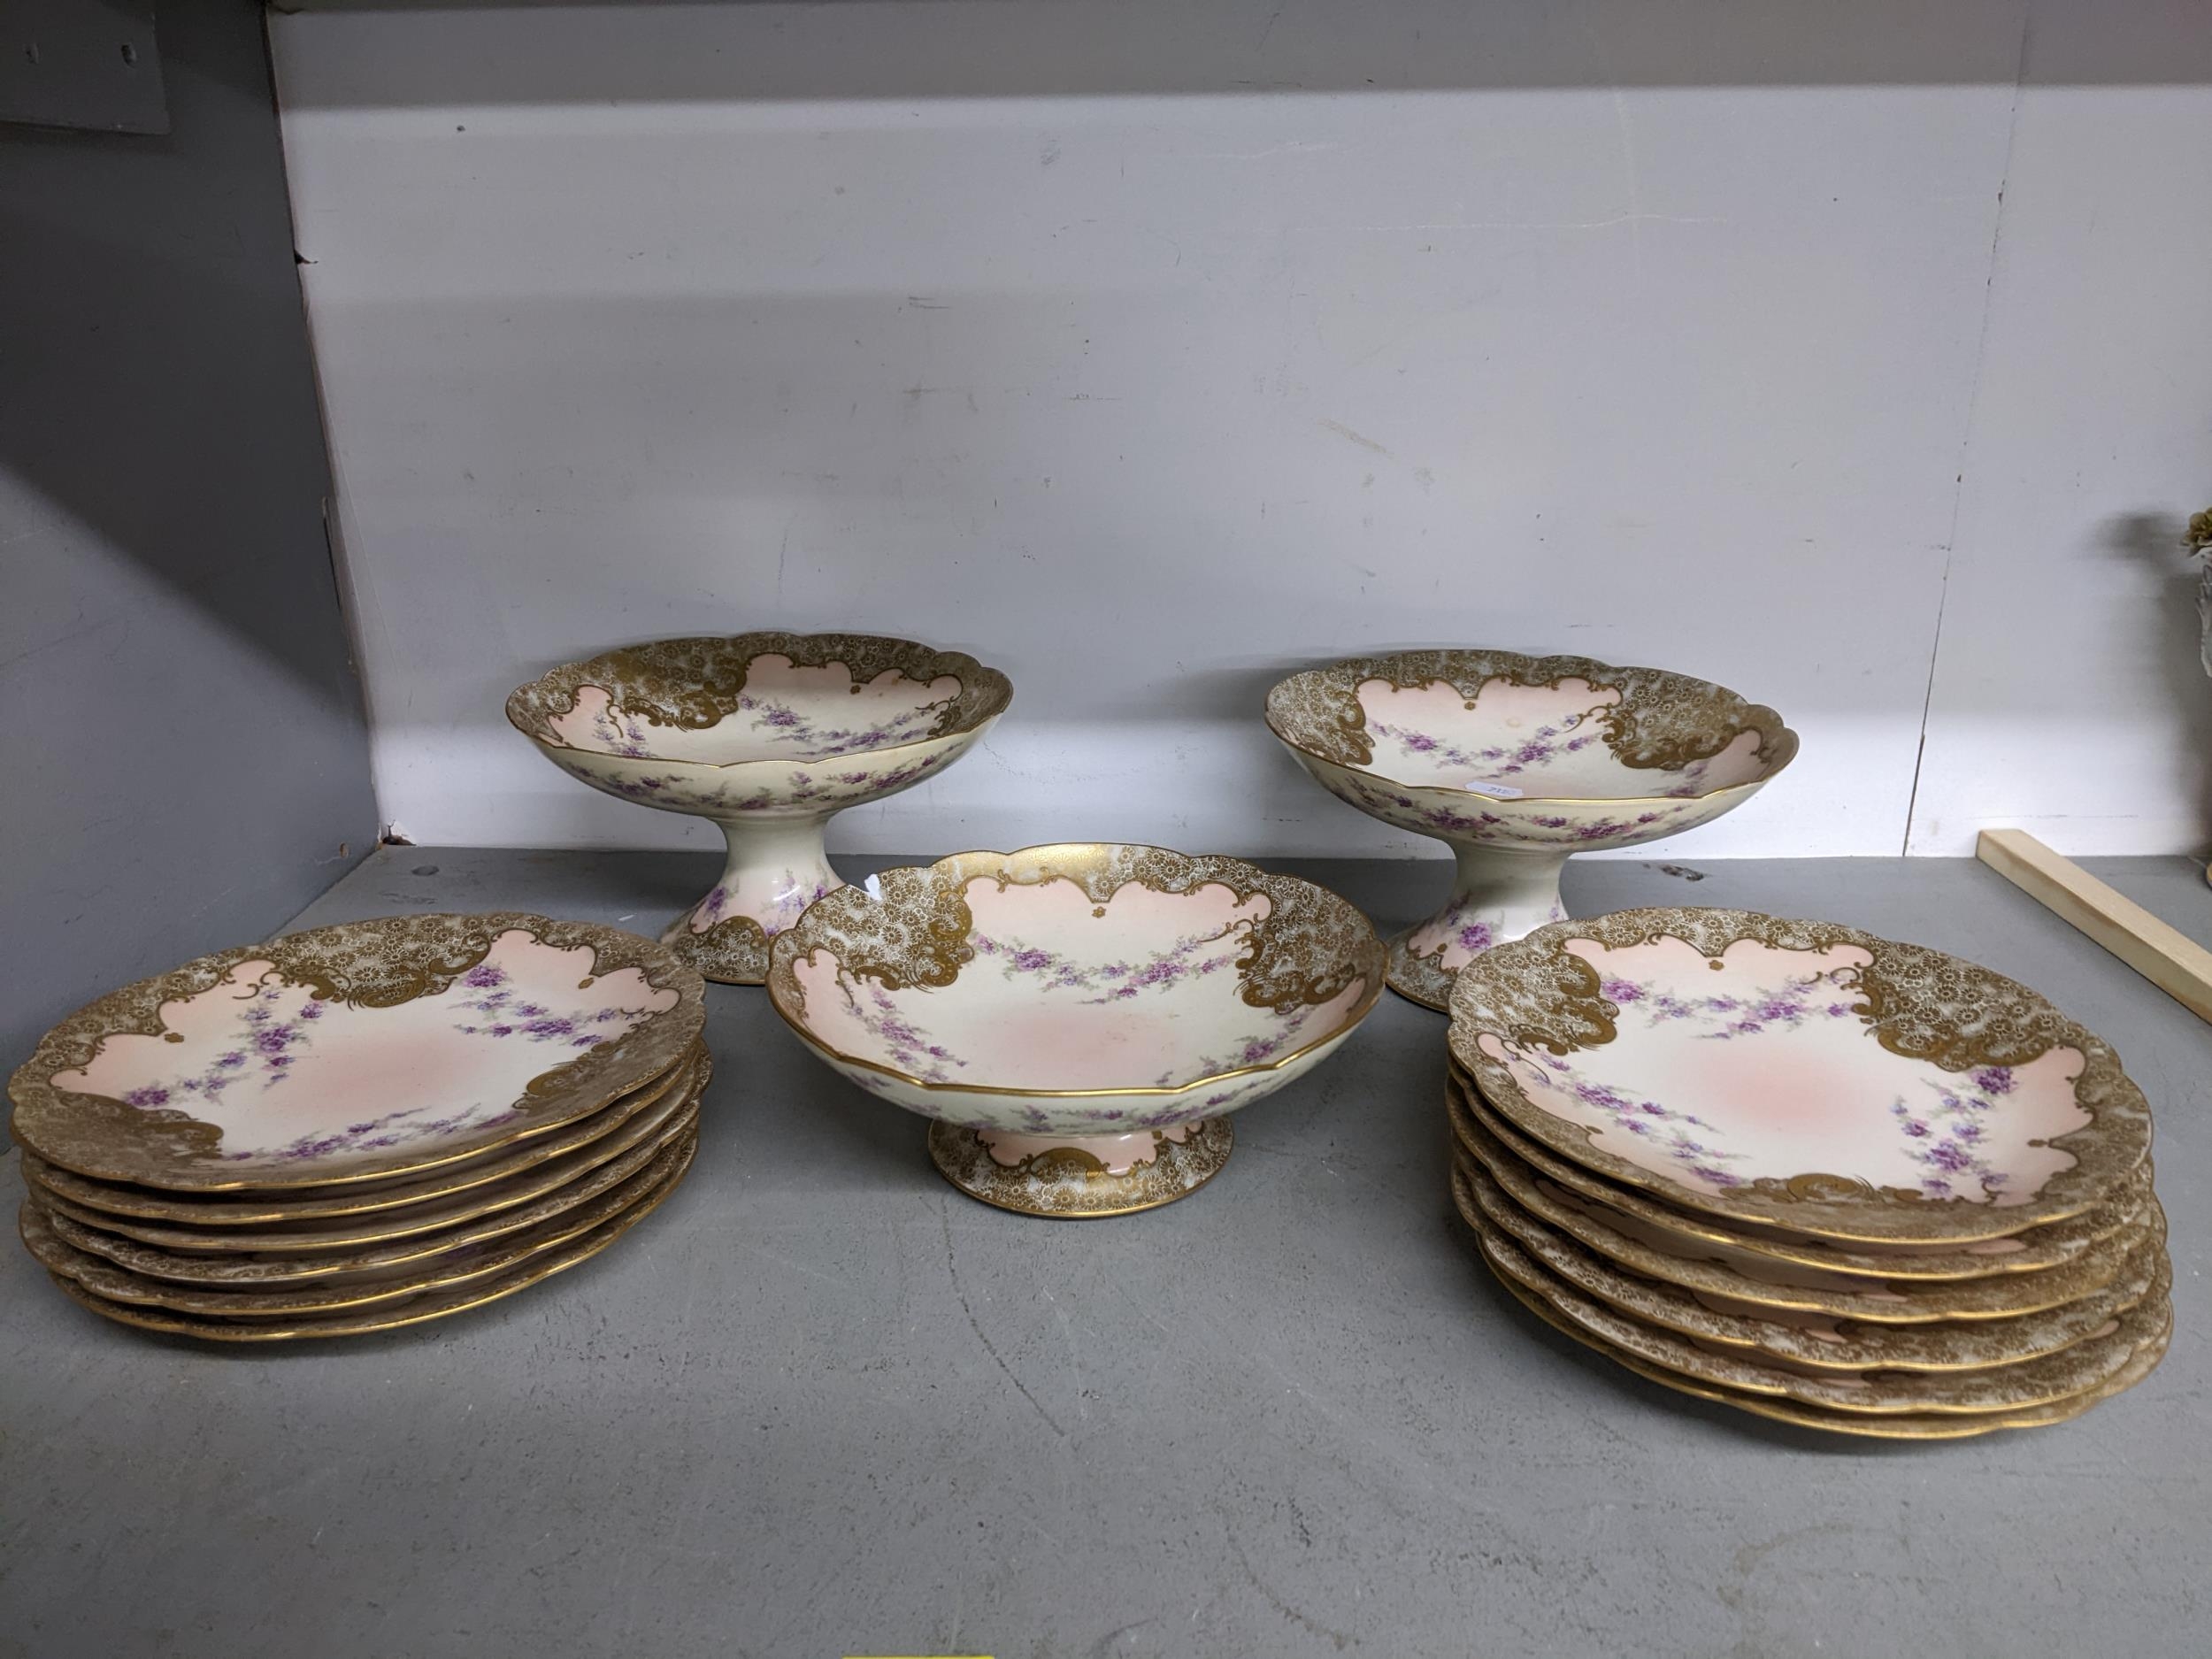 Late 19th/early 20th century Limoges porcelain dessert service decorated with flowers comprising